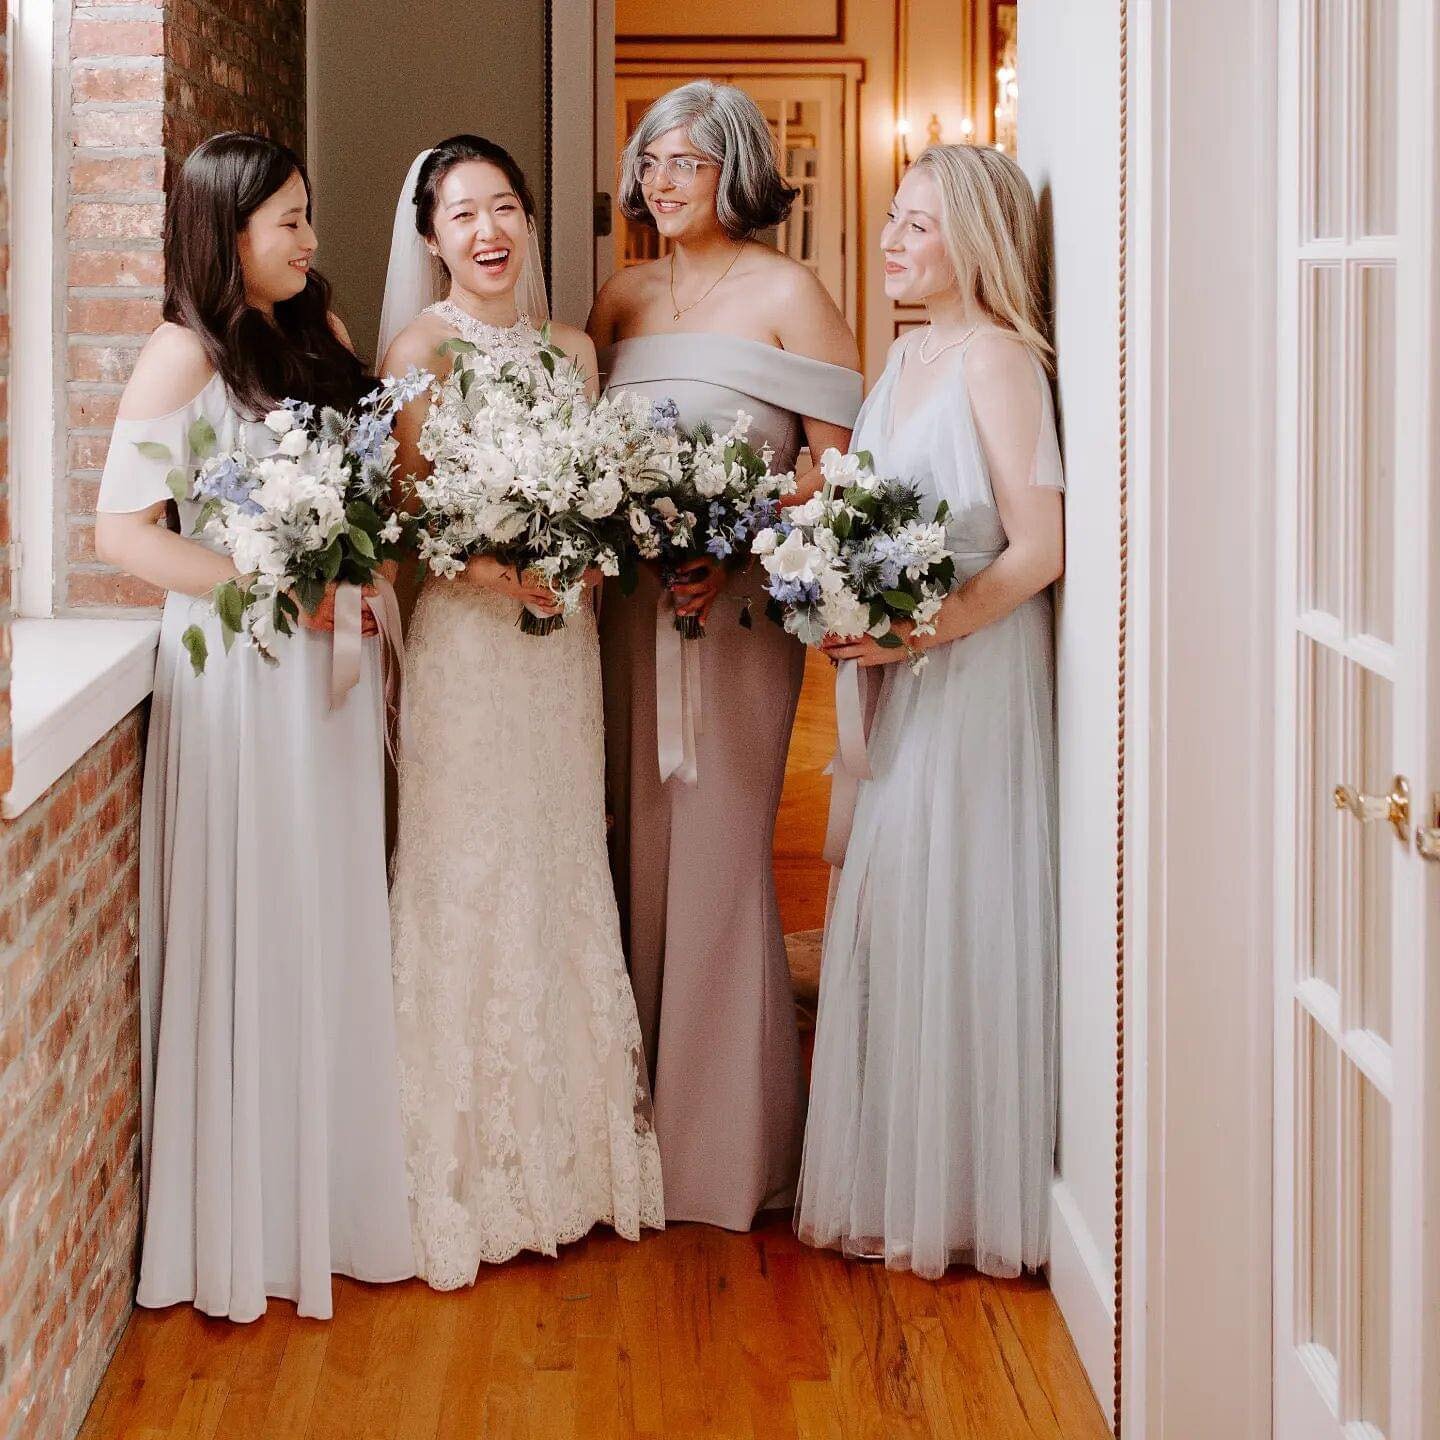 Our Spring Bride and her Bridesmaids. @daydreamfloral created elegant white bouquets with pops of Blue for the bridesmaids with trailing ribbon

📍 @jameswardmansion
📸 @karamccurdy

#daydreamfloralstudio #daydreamfloral #nyc #popofblue #maritimeparc